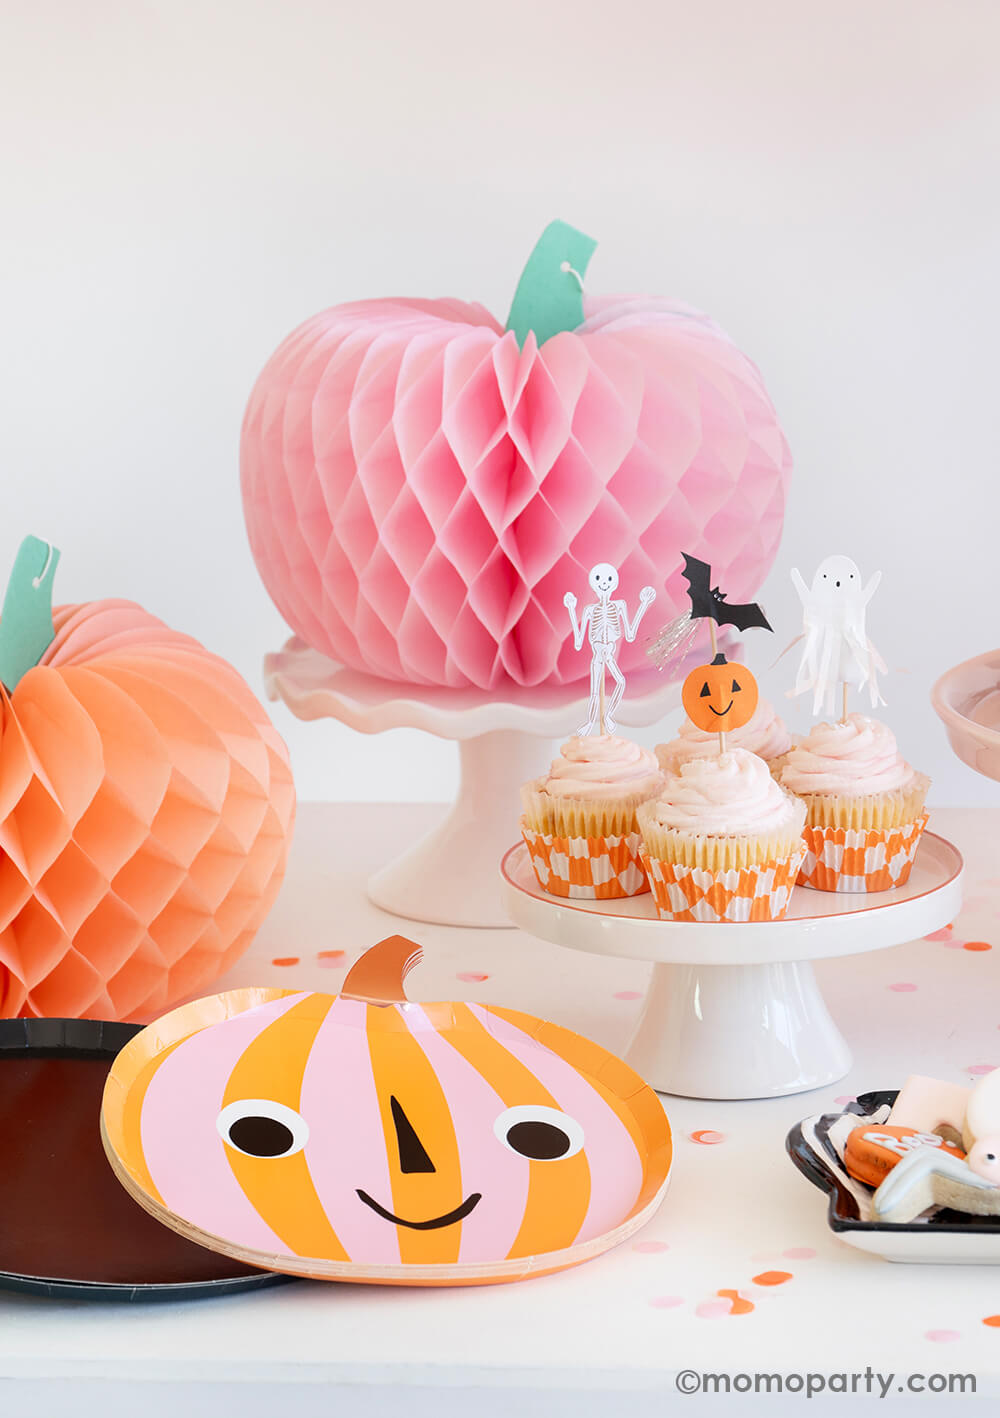 Momo Party's "Hey Pumpkin" party box featuring two honeycomb pumpkins in boo-tiful colors of pink and peach. With a smiley pumpkin shaped plates and a set of cute cupcakes topped with Halloween character toppers including a pumpkin, a skeleton, a bat and a ghost,  it creates a too cute to spook vibe for a fun kid's friendly Halloween party.